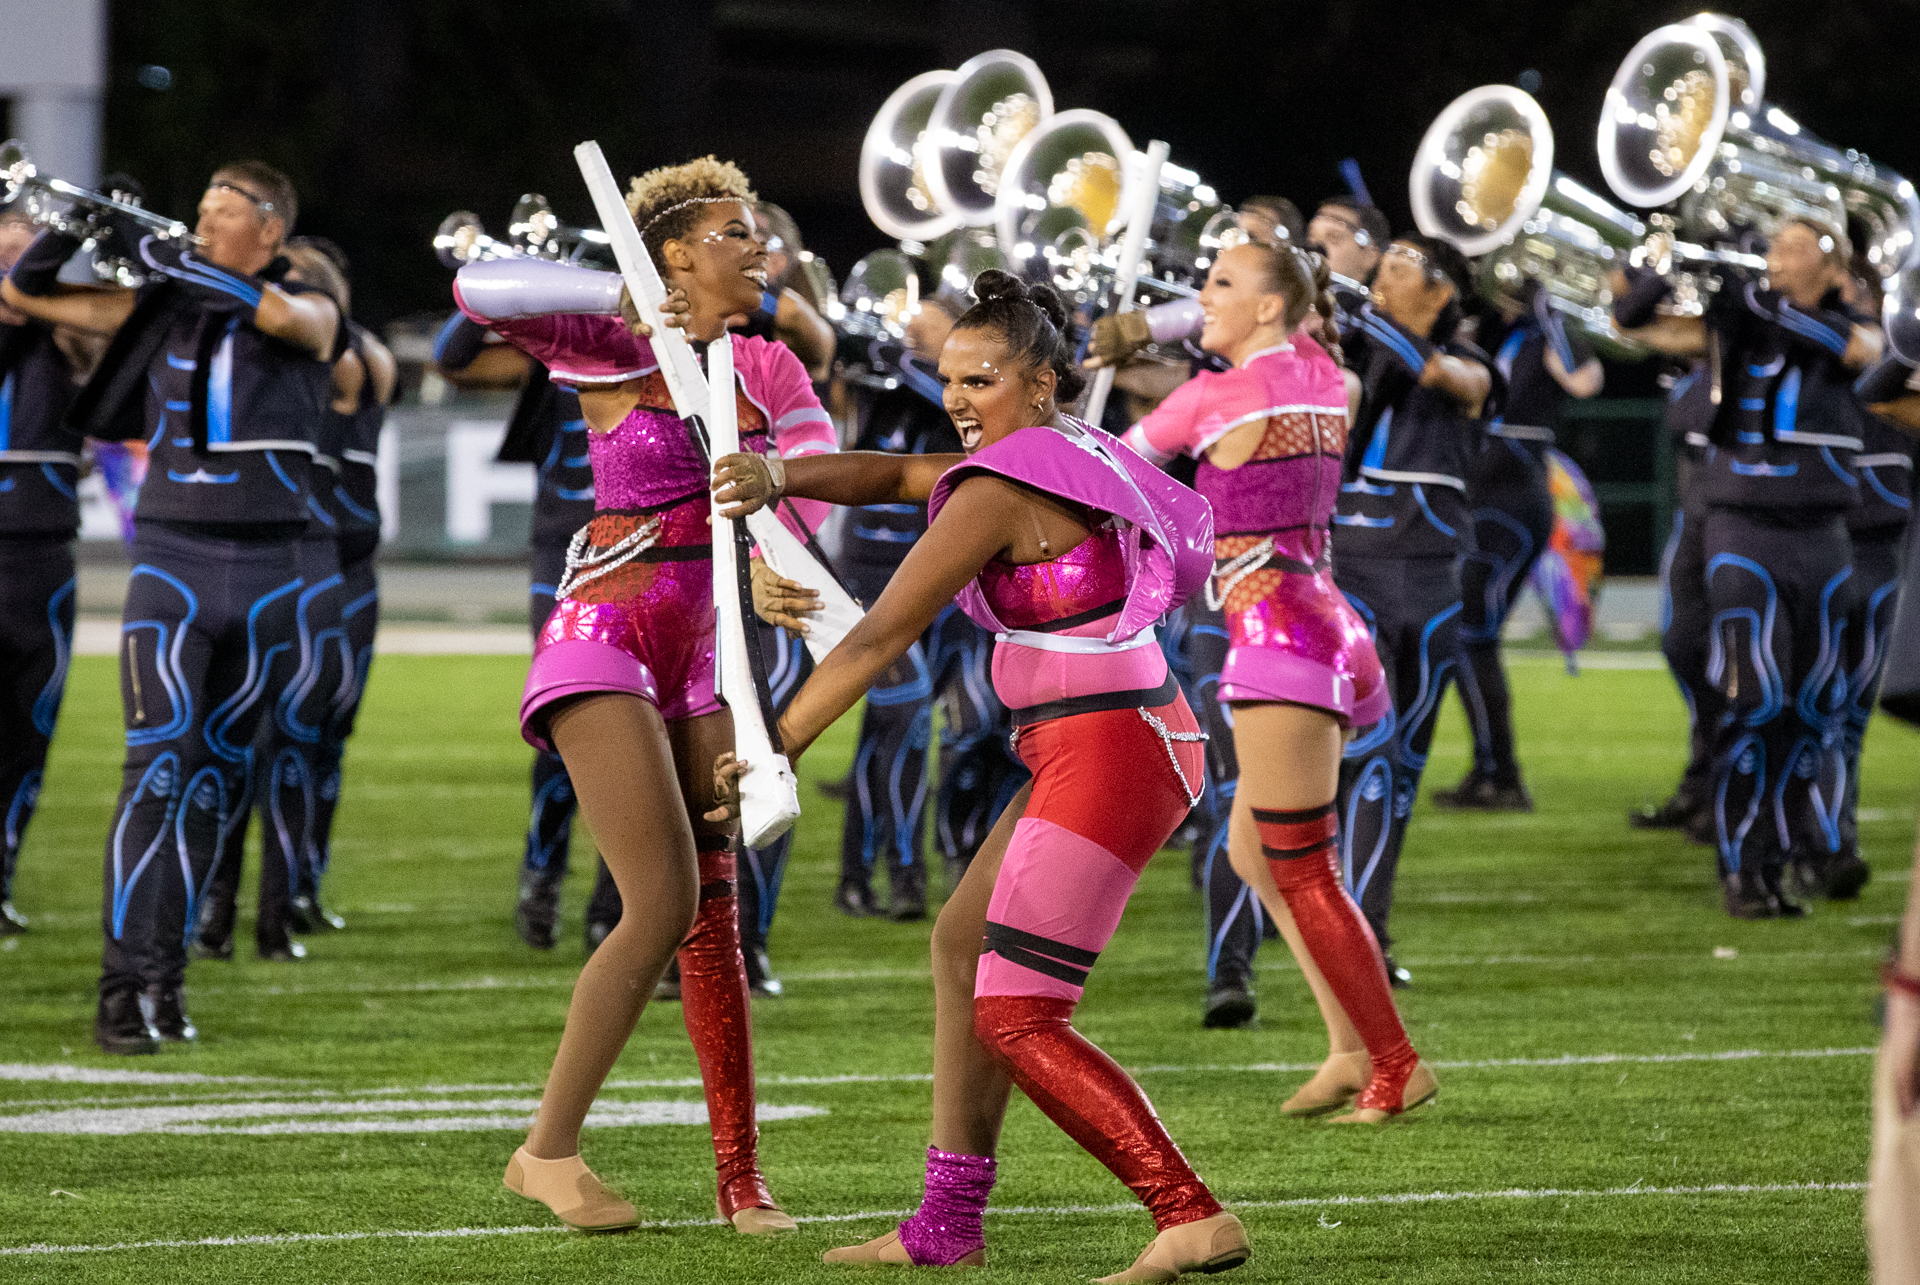 Members of the Mandarins drum and bugle corps dressed in lavish pink and blue costumes dance play instruments on the field at Sac State's Hornet Stadium.